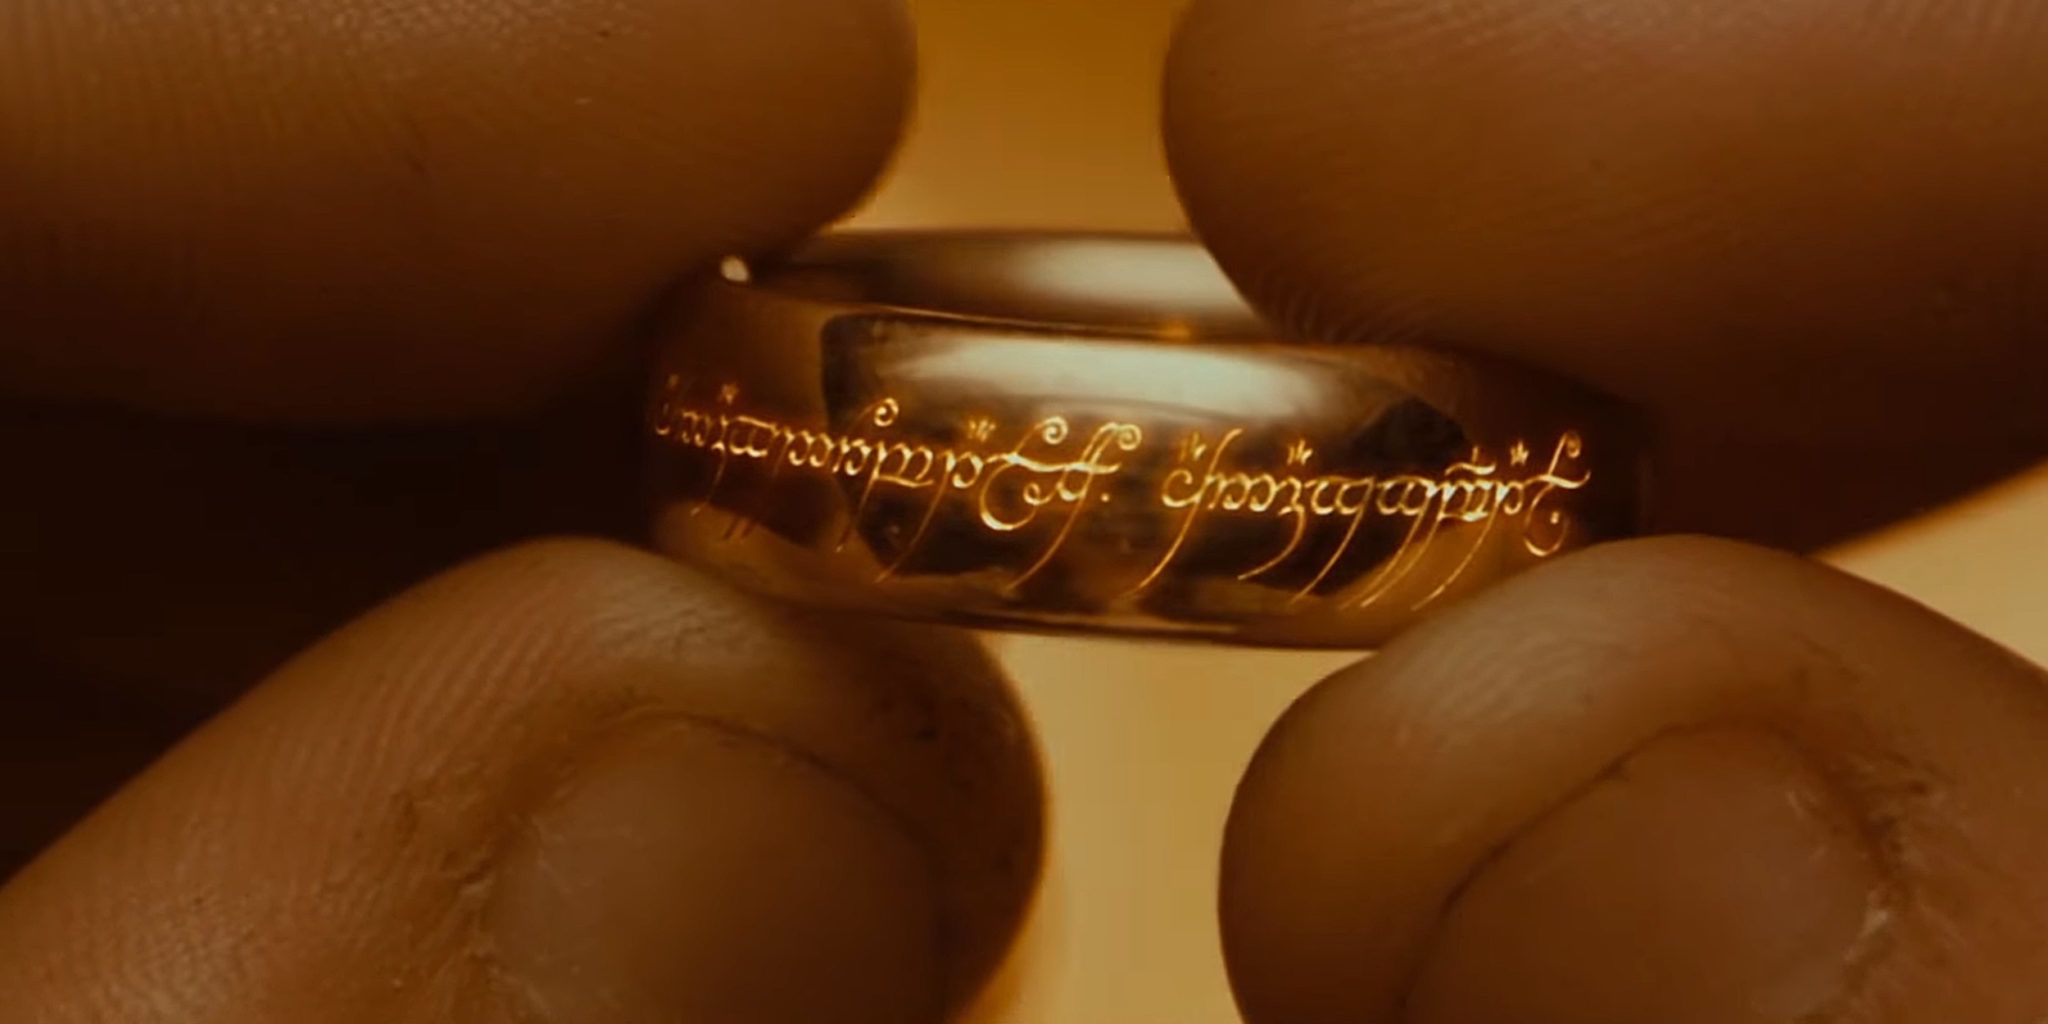 lord of the rings amazon